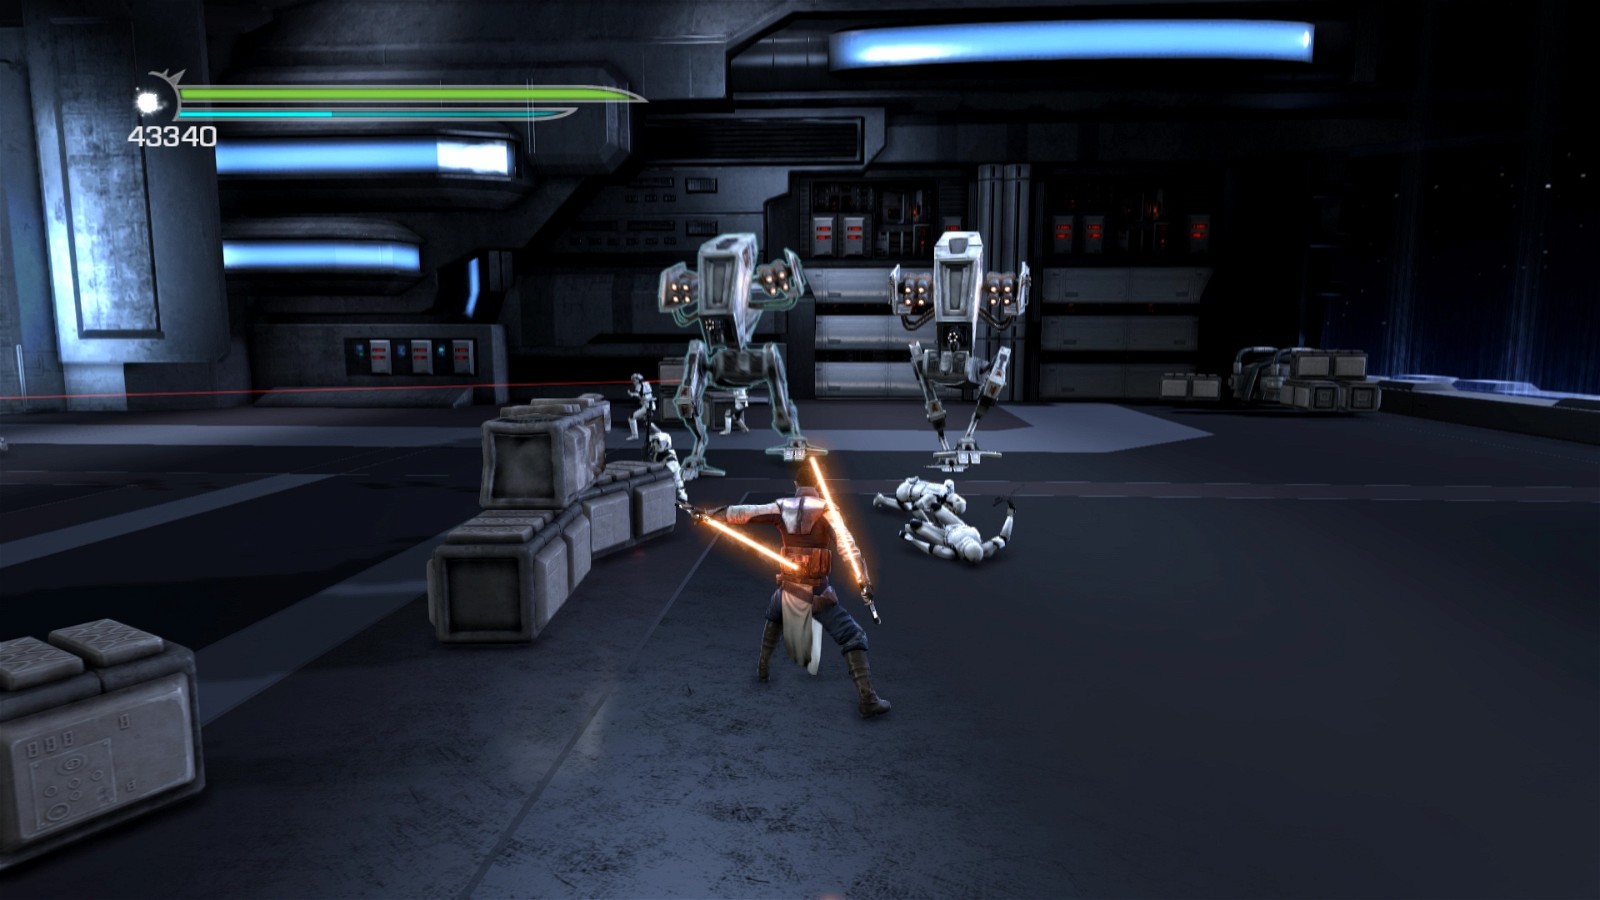 Free Video Games for August Include Star Wars: The Force Unleashed II